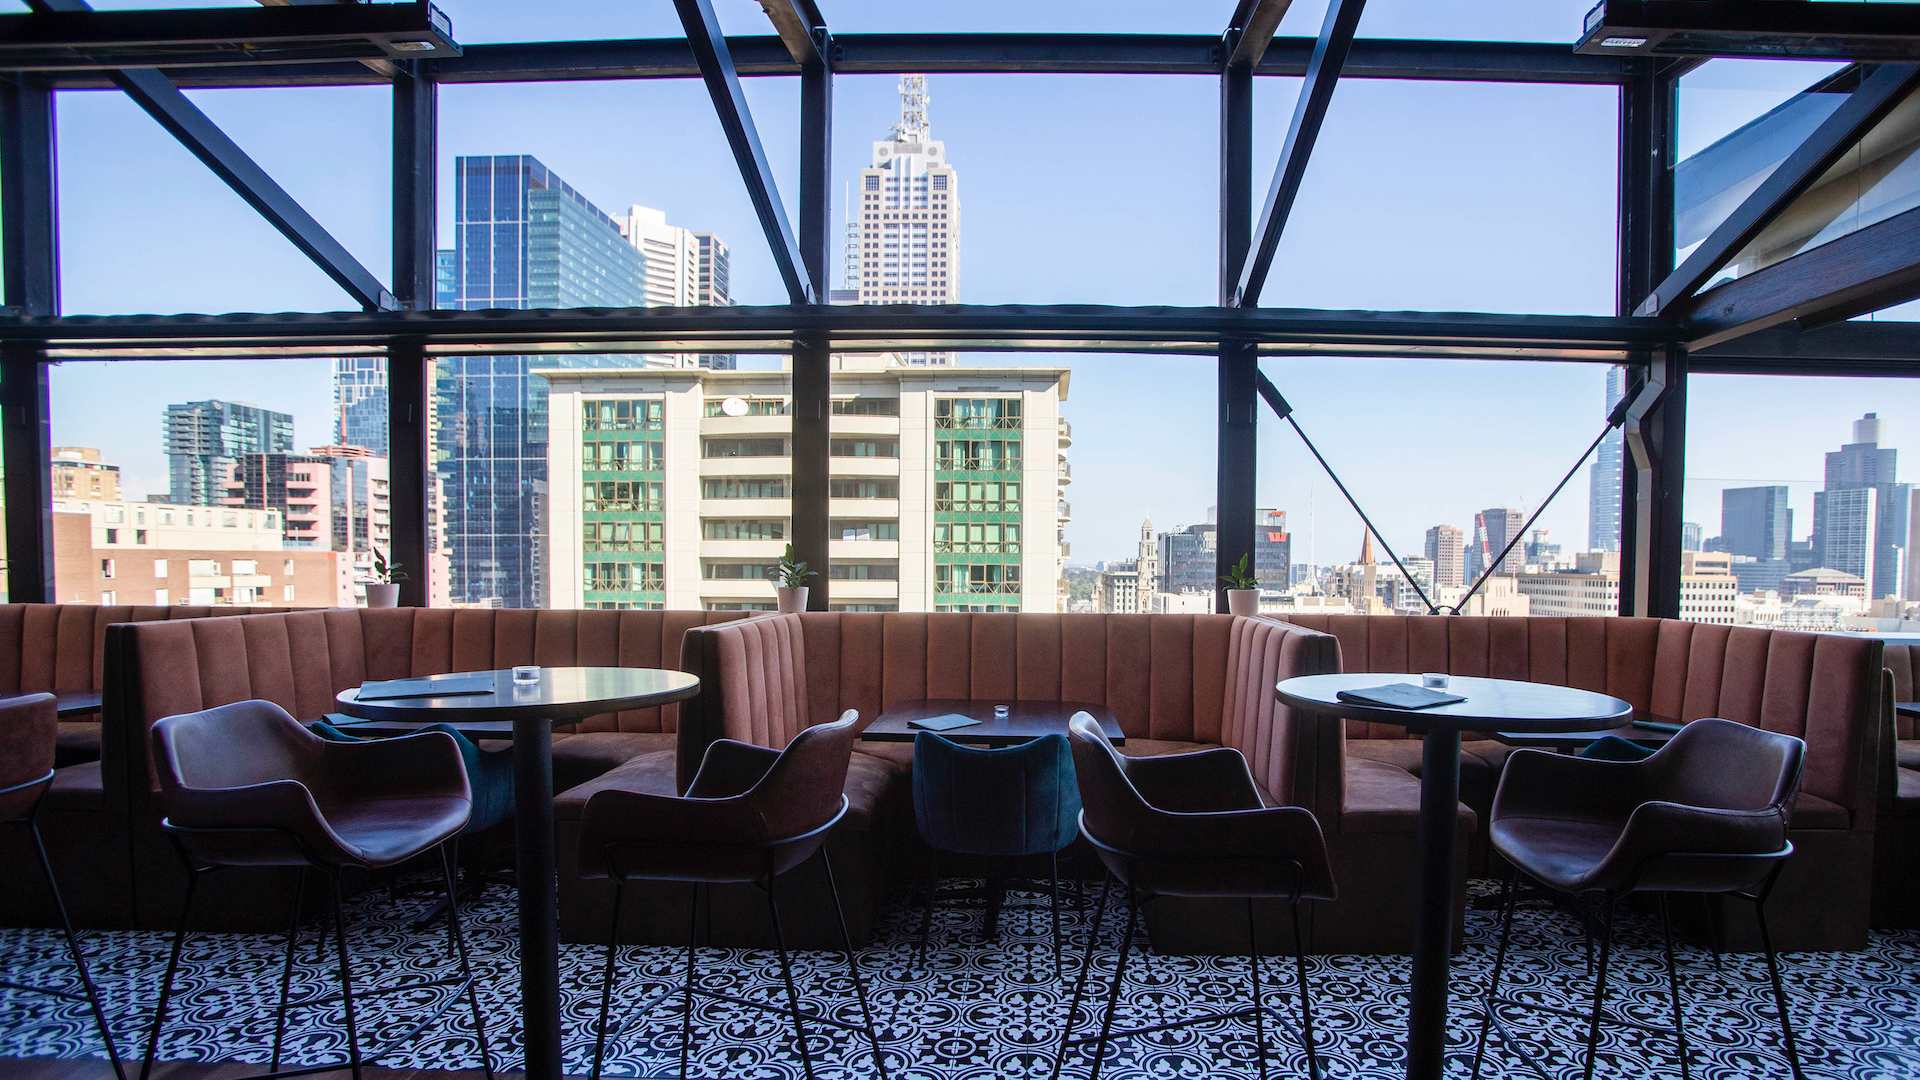 Fable Is Melbourne's Highest Rooftop Bar and the City's Newest Drinking Destination